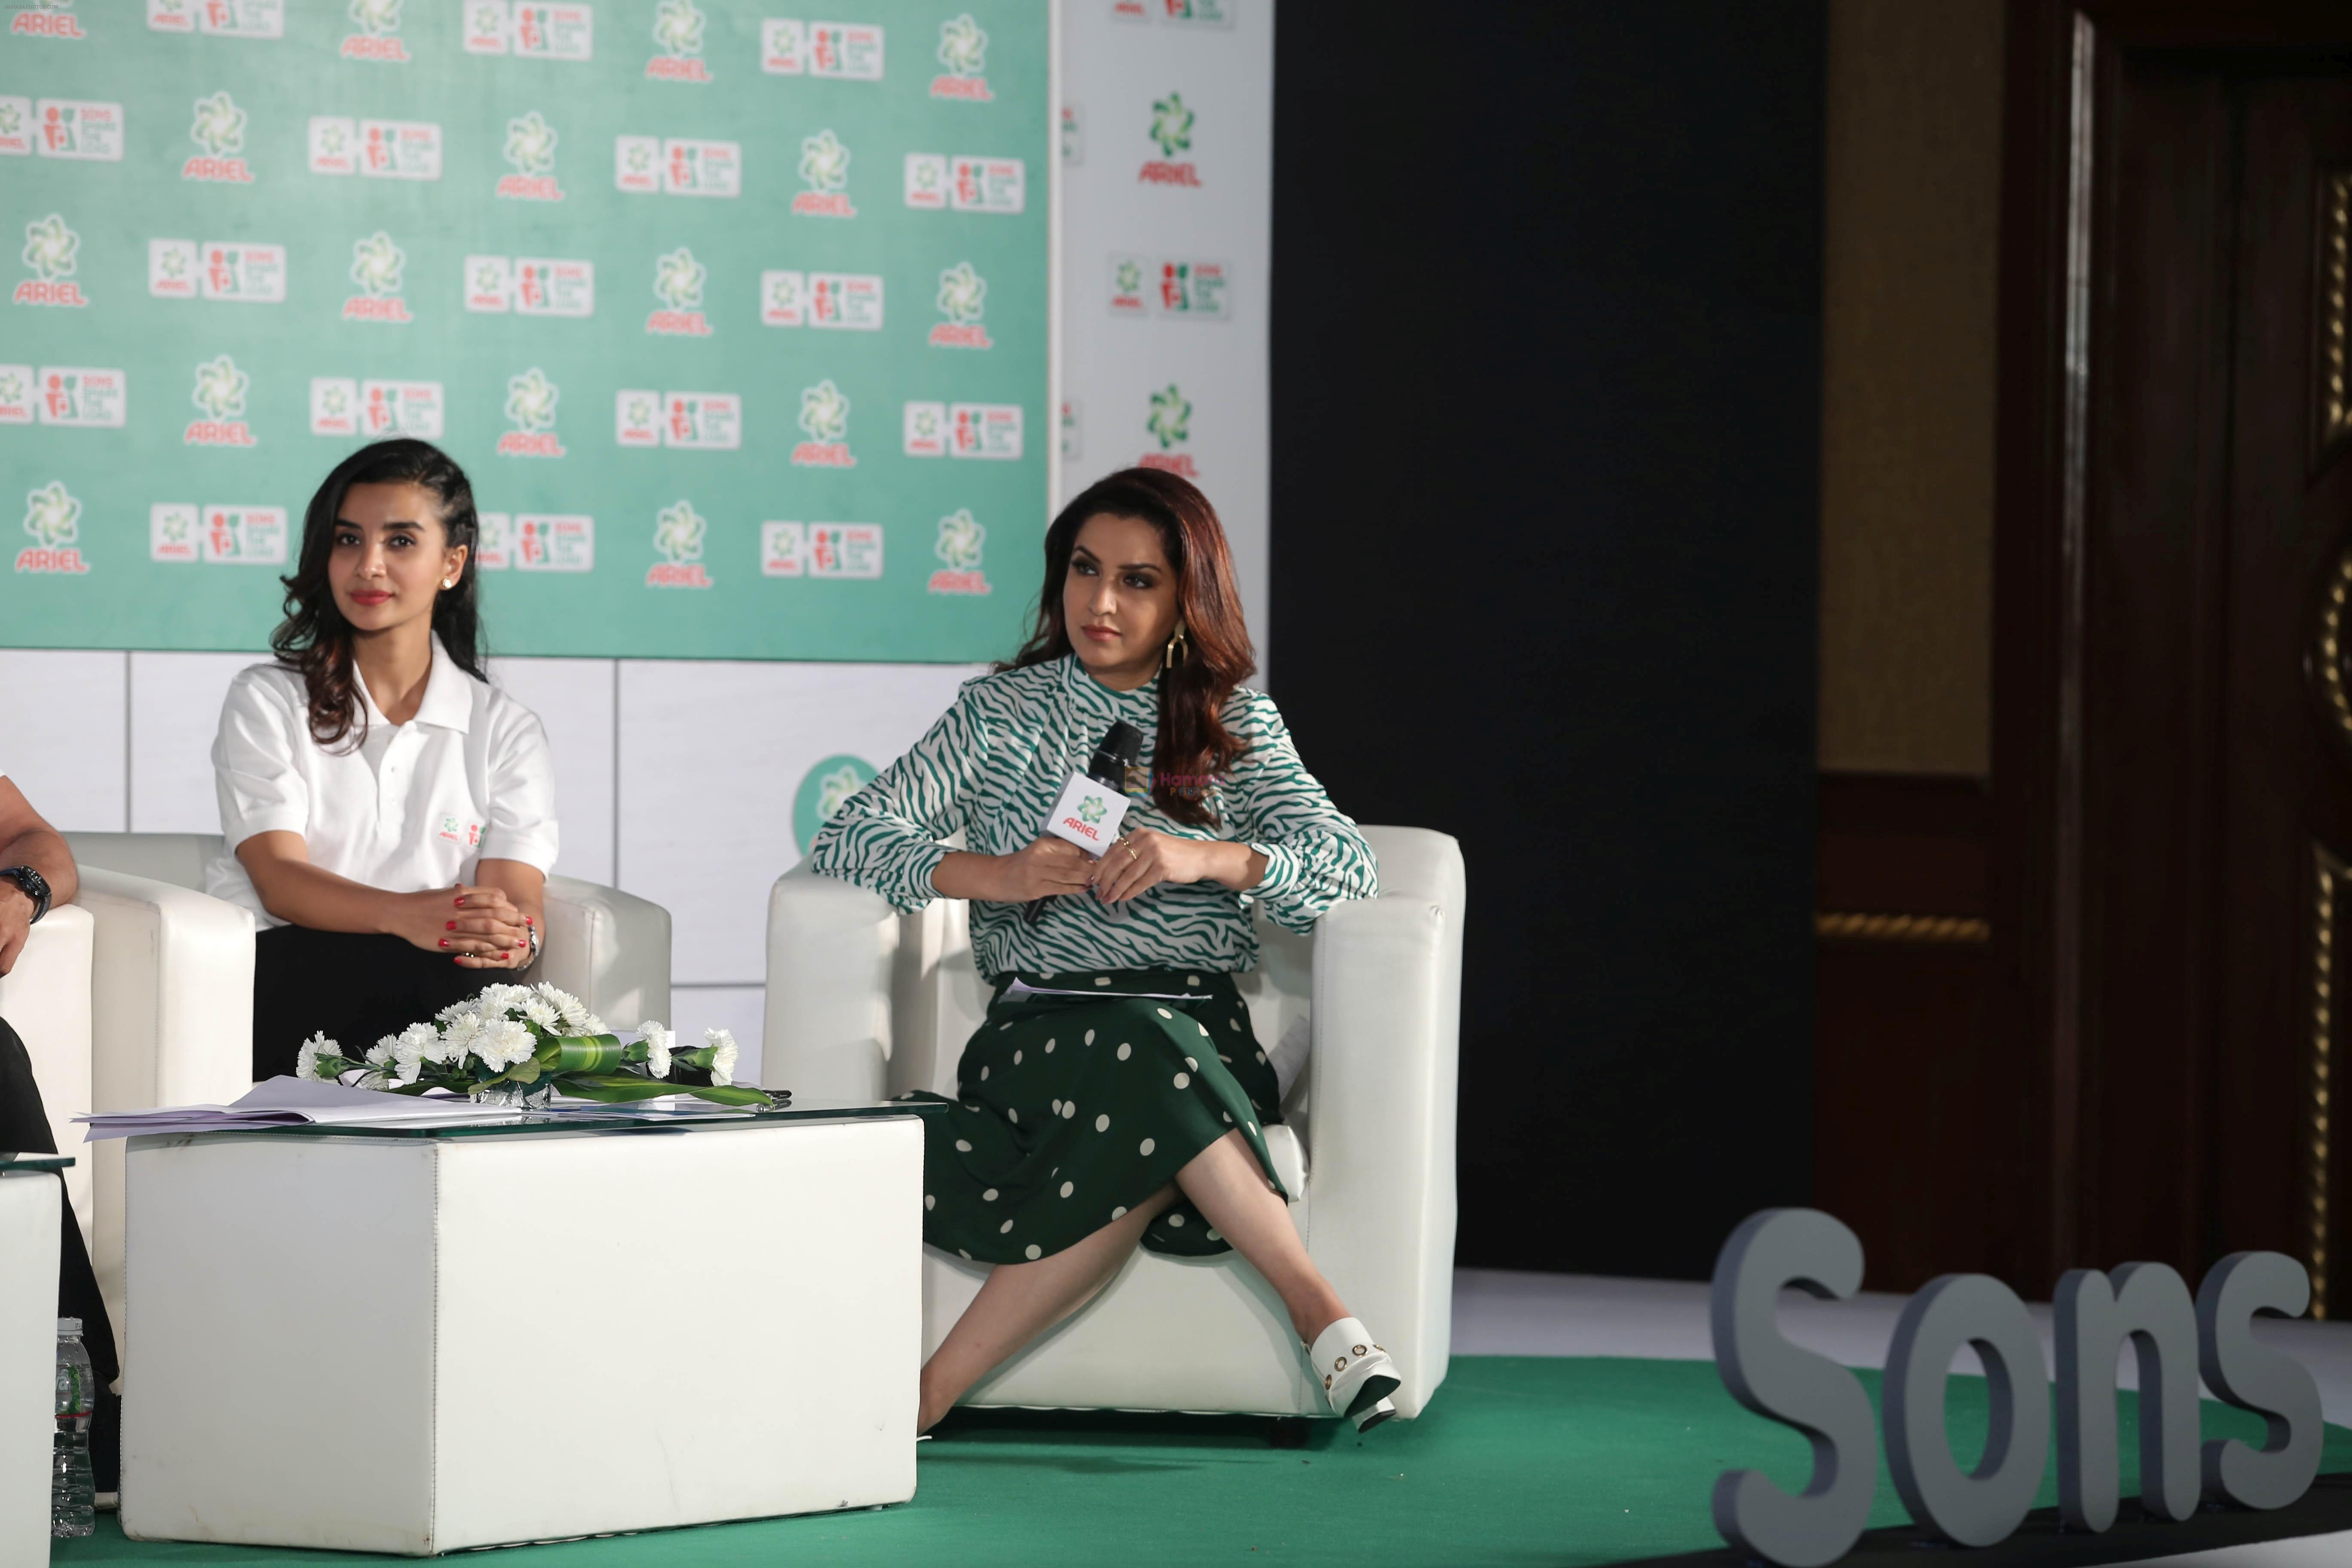 Rajkumar Rao , Patralekha at the launch of Ariel's new film Sons #ShareTheLoad at ITC Grand Central in parel on 7th Feb 2019